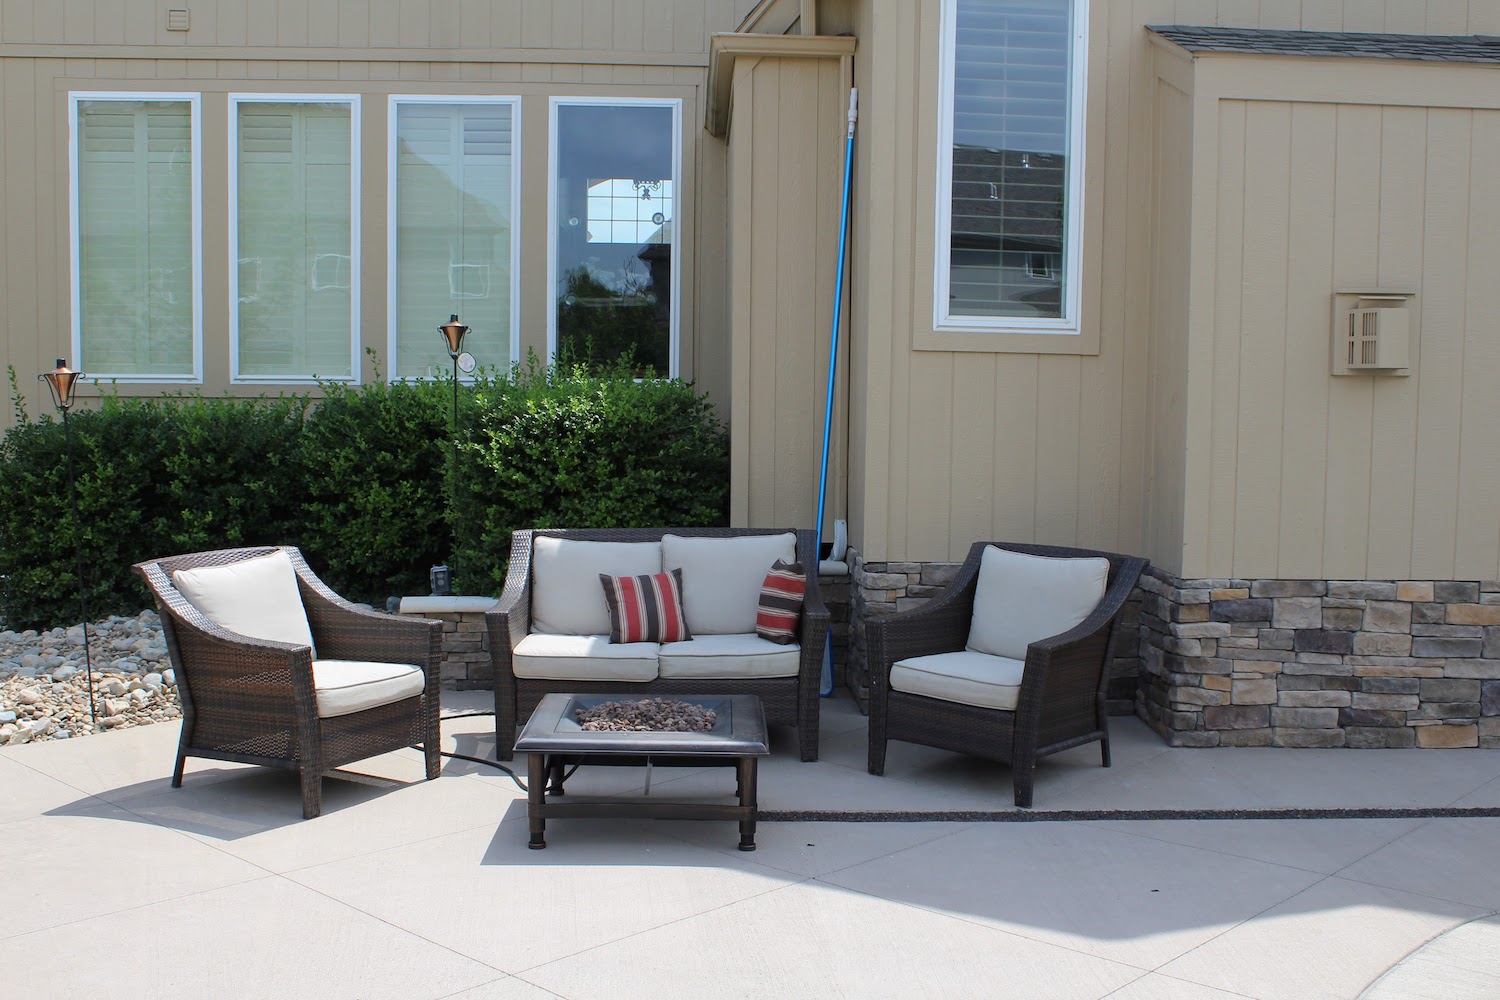 patio contractor and deck design in Leawood, Lenexa, Overland Park, Kansas City